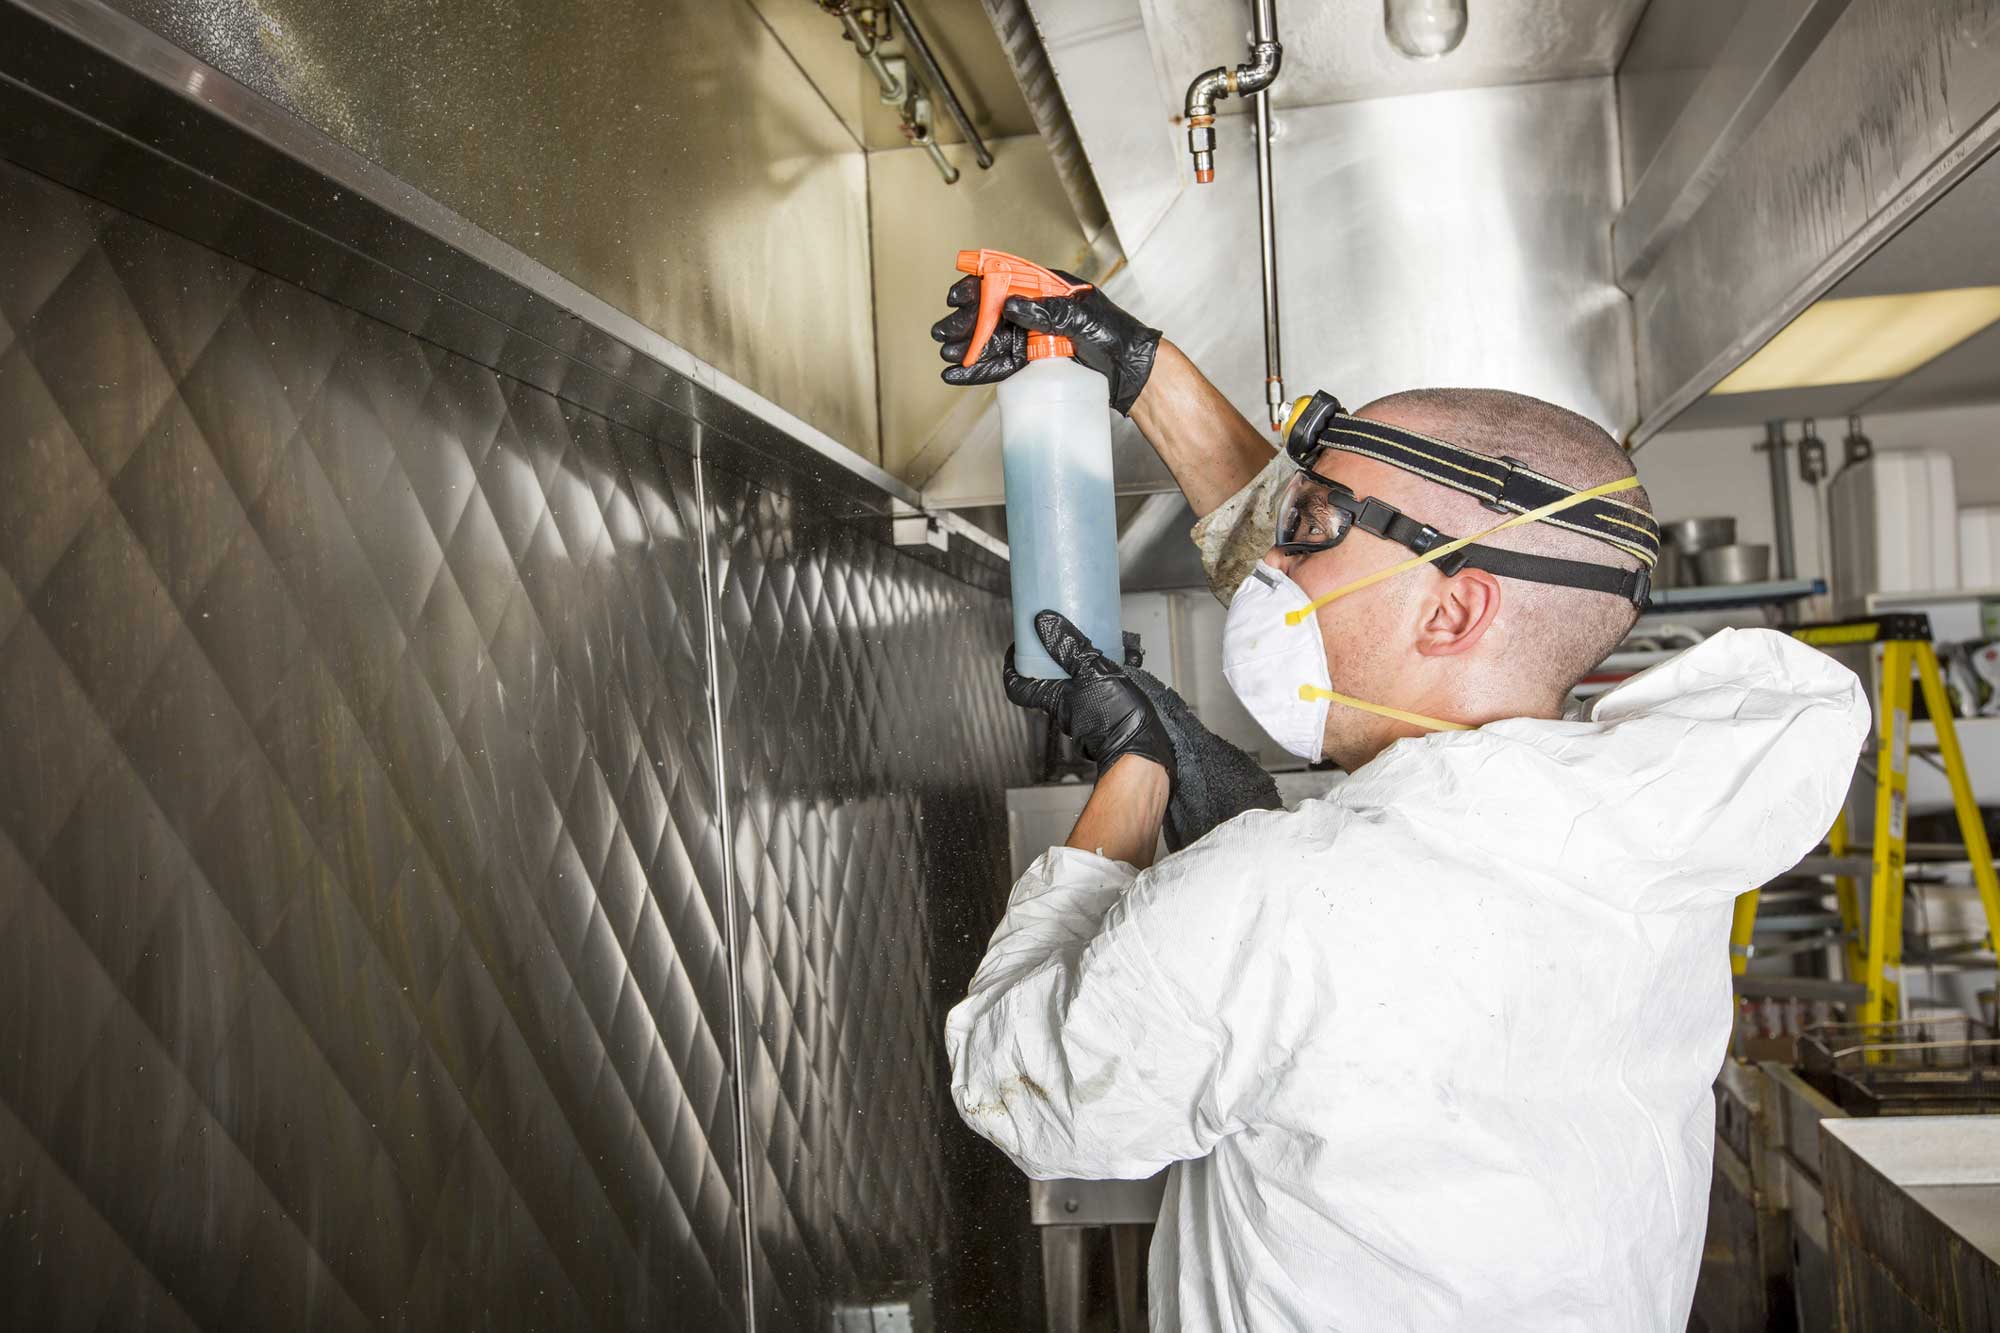 Man using a spray to clean ovens